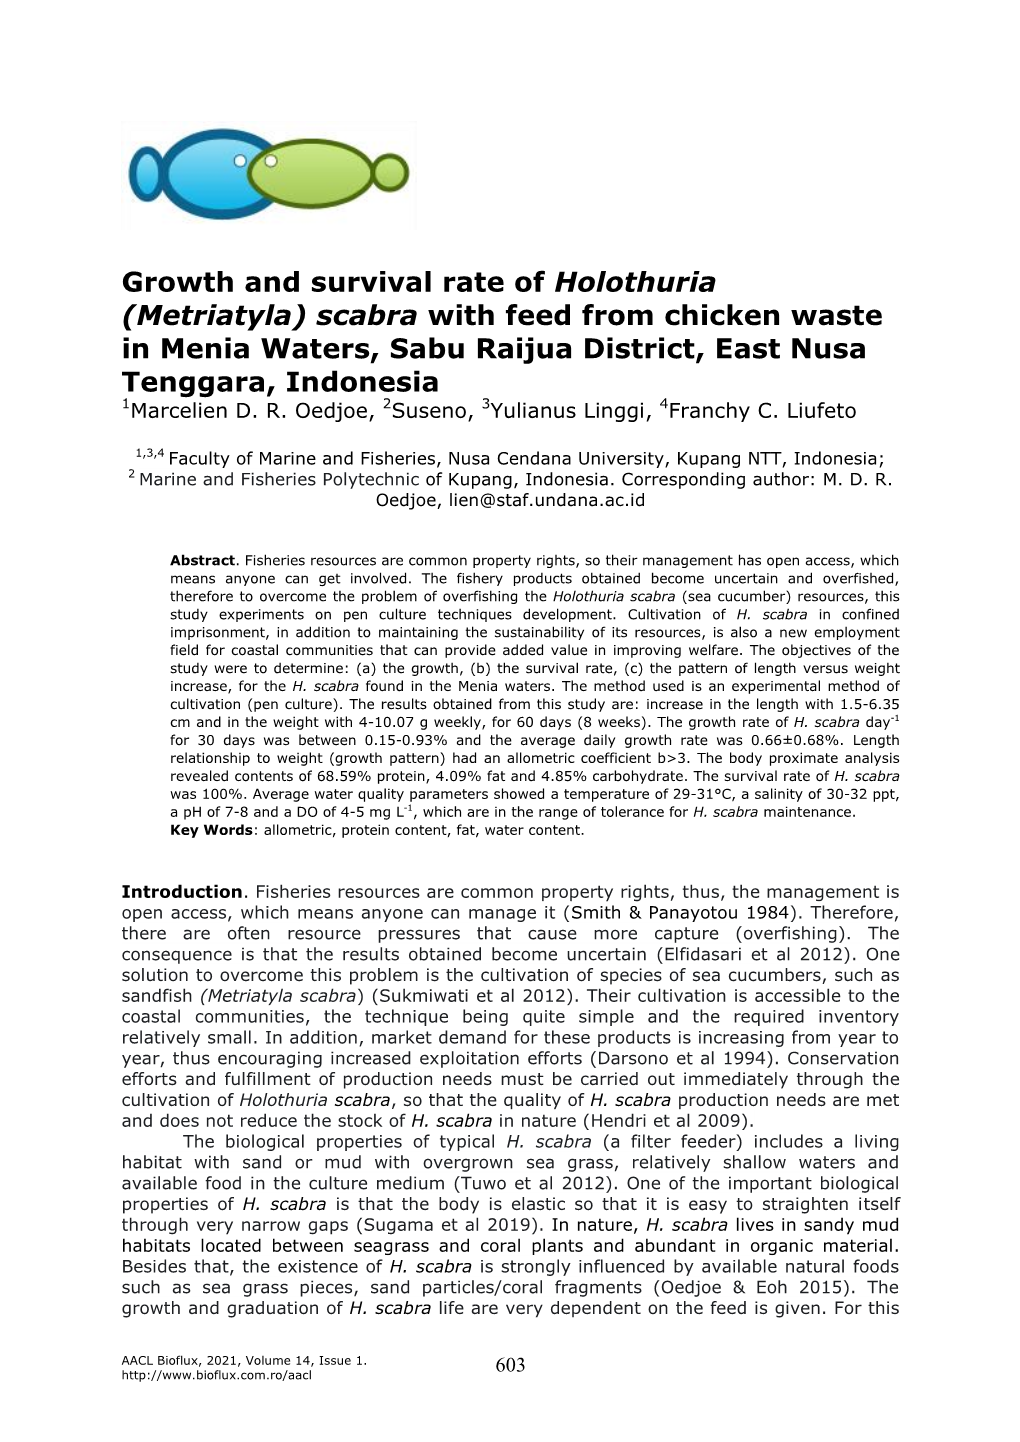 Growth and Survival Rate of Holothuria